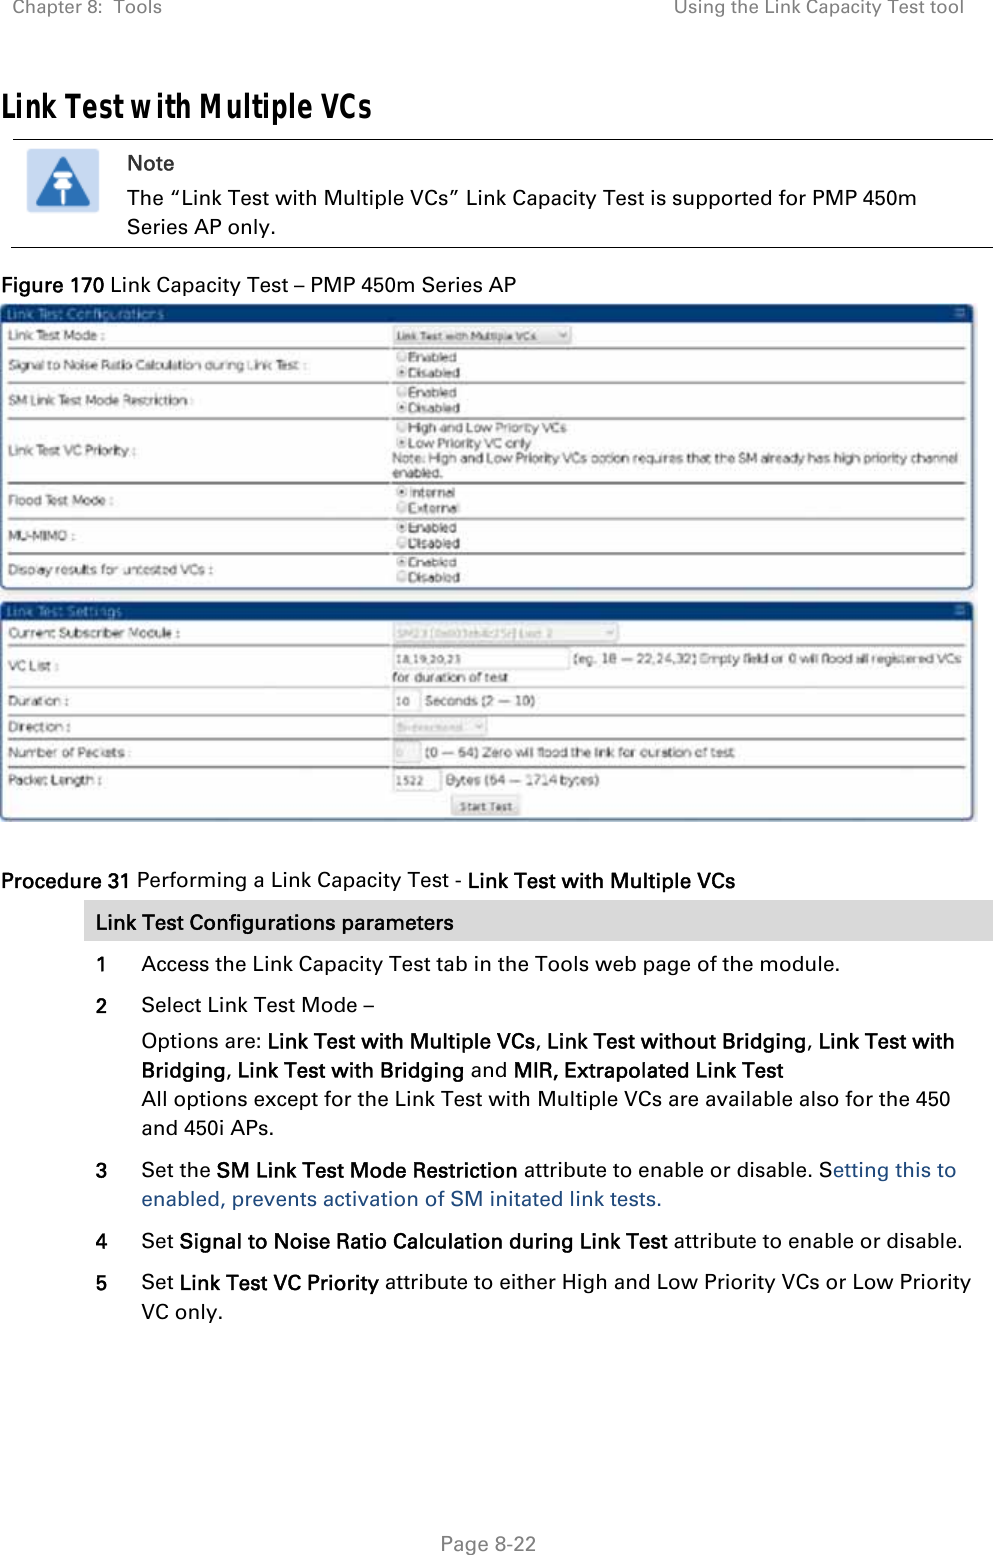 Chapter 8:  Tools  Using the Link Capacity Test tool   Page 8-22 Link Test with Multiple VCs  Note The “Link Test with Multiple VCs” Link Capacity Test is supported for PMP 450m Series AP only. Figure 170 Link Capacity Test – PMP 450m Series AP   Procedure 31 Performing a Link Capacity Test - Link Test with Multiple VCs Link Test Configurations parameters 1  Access the Link Capacity Test tab in the Tools web page of the module. 2  Select Link Test Mode – Options are: Link Test with Multiple VCs, Link Test without Bridging, Link Test with Bridging, Link Test with Bridging and MIR, Extrapolated Link Test All options except for the Link Test with Multiple VCs are available also for the 450 and 450i APs. 3  Set the SM Link Test Mode Restriction attribute to enable or disable. Setting this to enabled, prevents activation of SM initated link tests. 4  Set Signal to Noise Ratio Calculation during Link Test attribute to enable or disable. 5  Set Link Test VC Priority attribute to either High and Low Priority VCs or Low Priority VC only. 